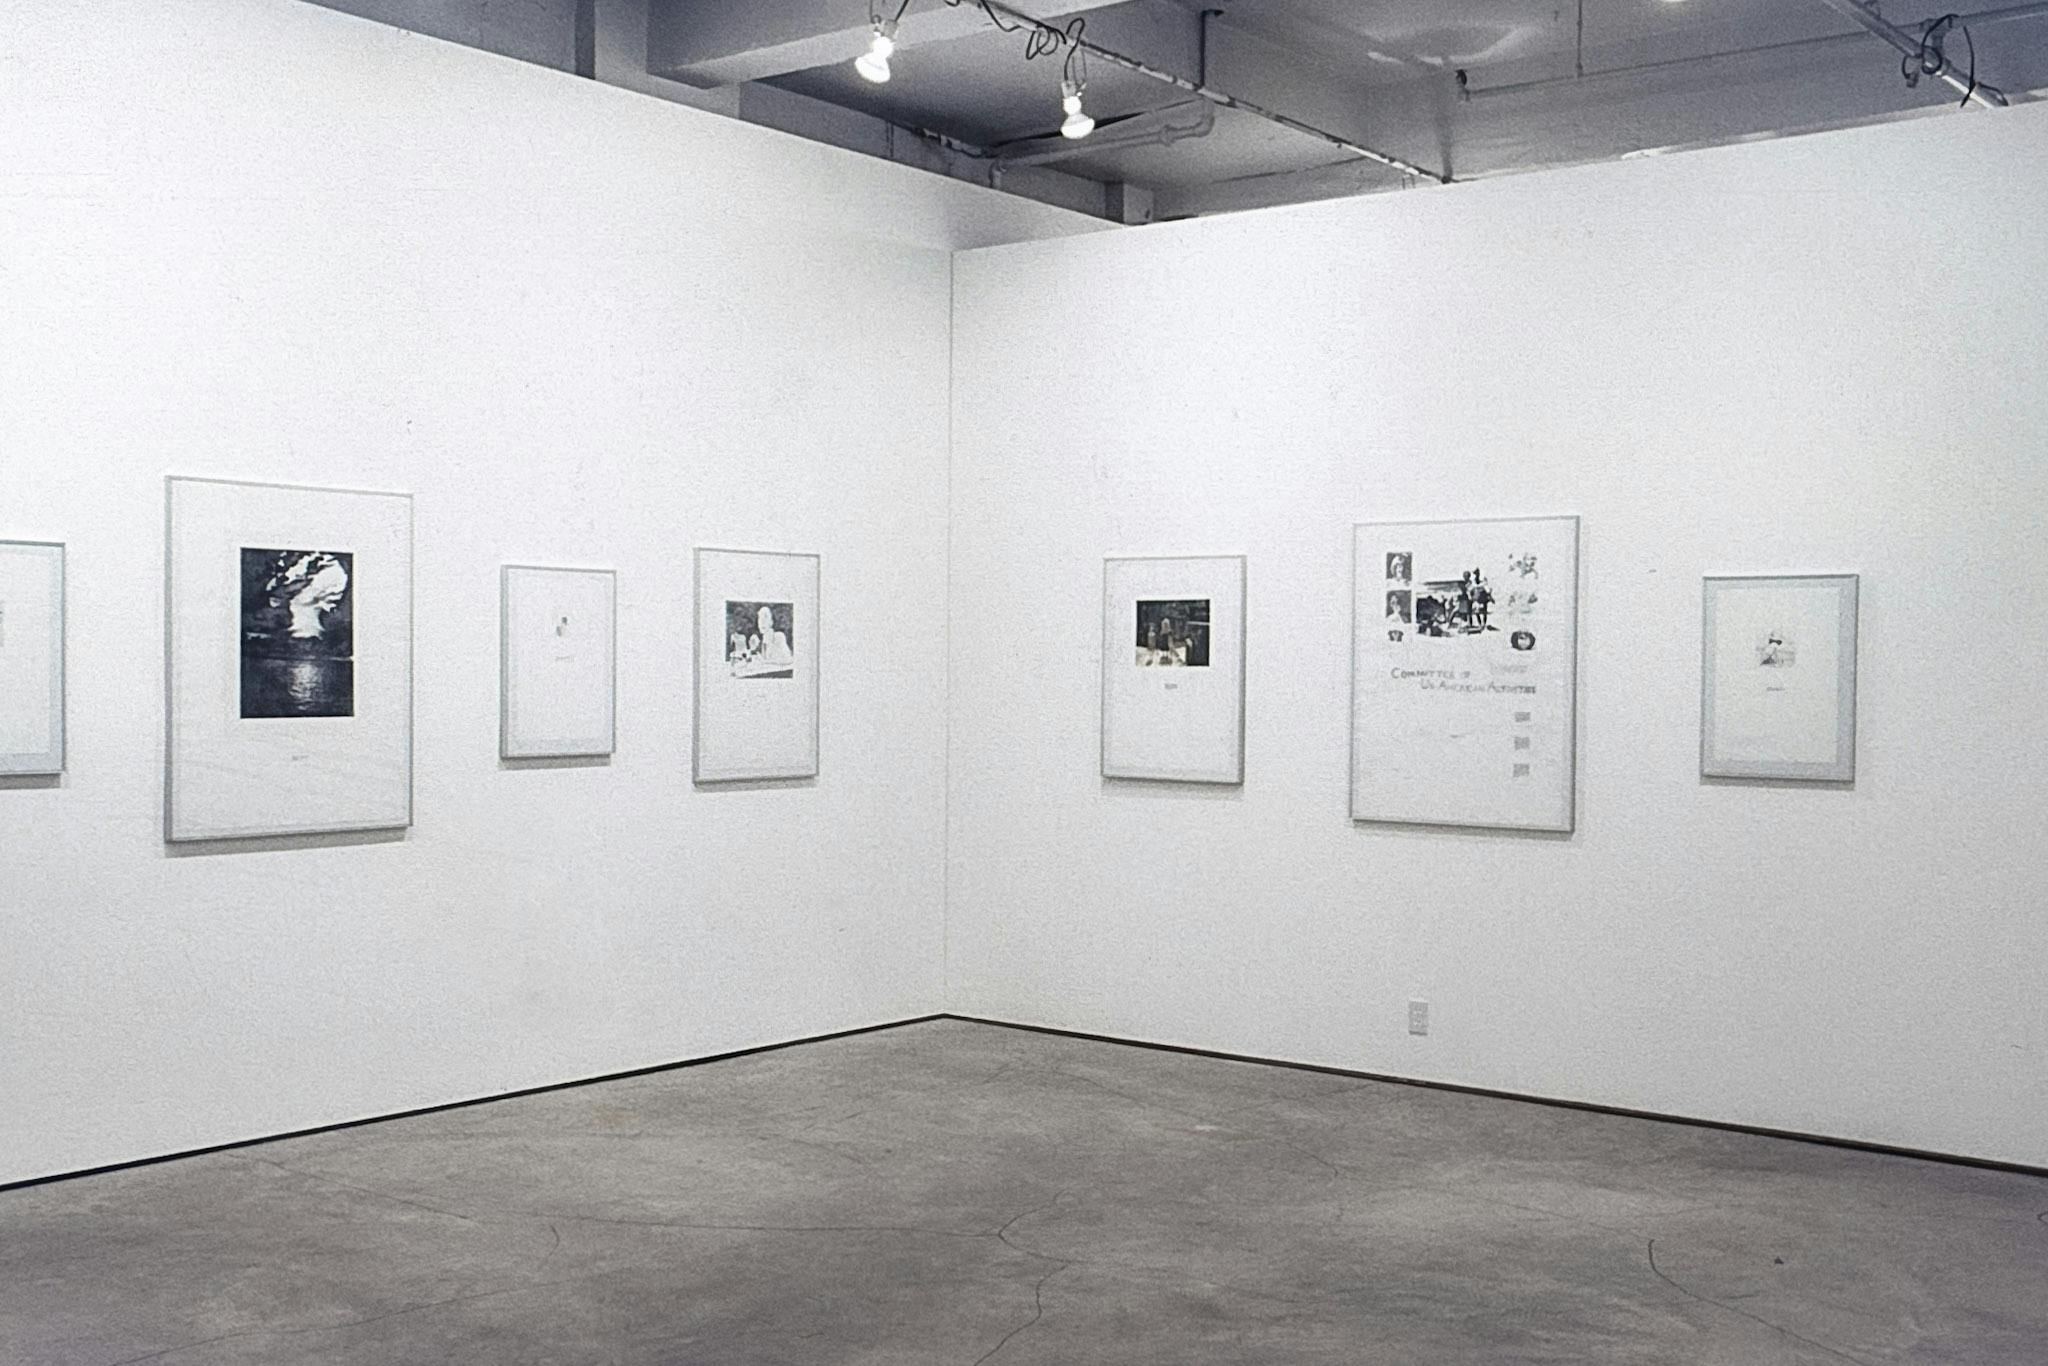 The corner of a gallery space. Different-sized illustrations and collages are in metal frames mounted on the white walls.